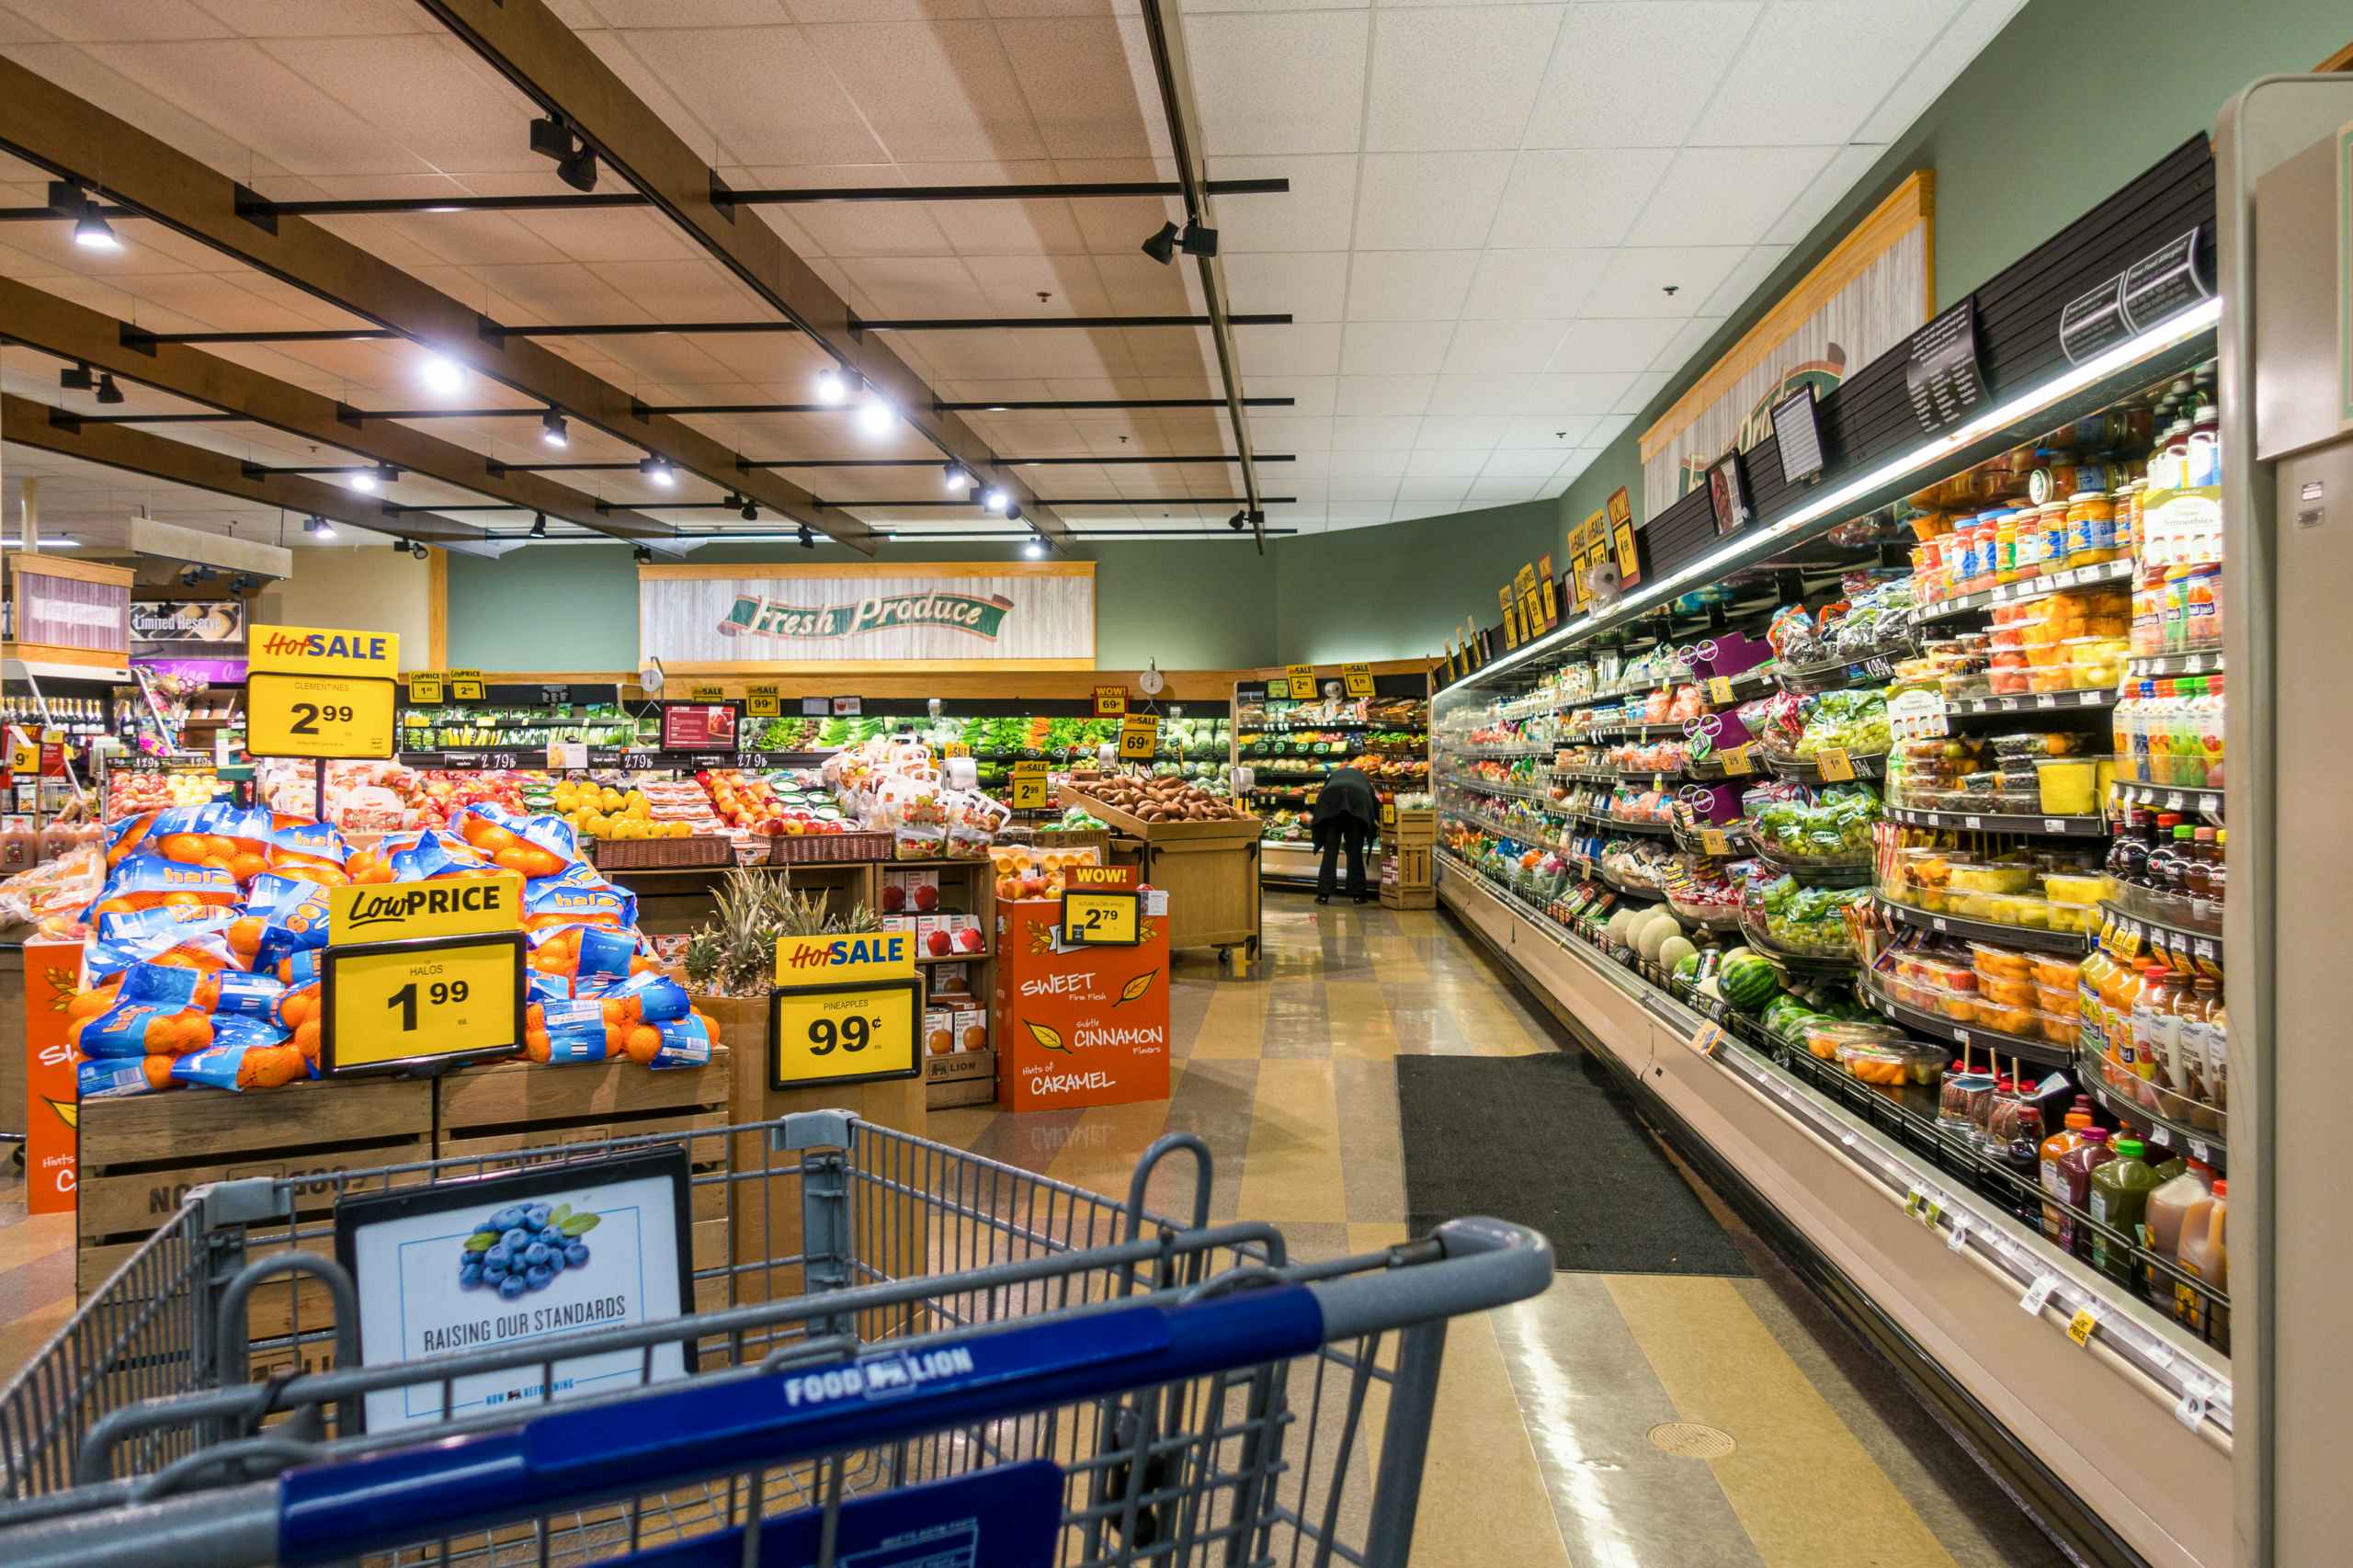 food-lion-grpcery-store-produce-section-cart-dreamstime-id107207466